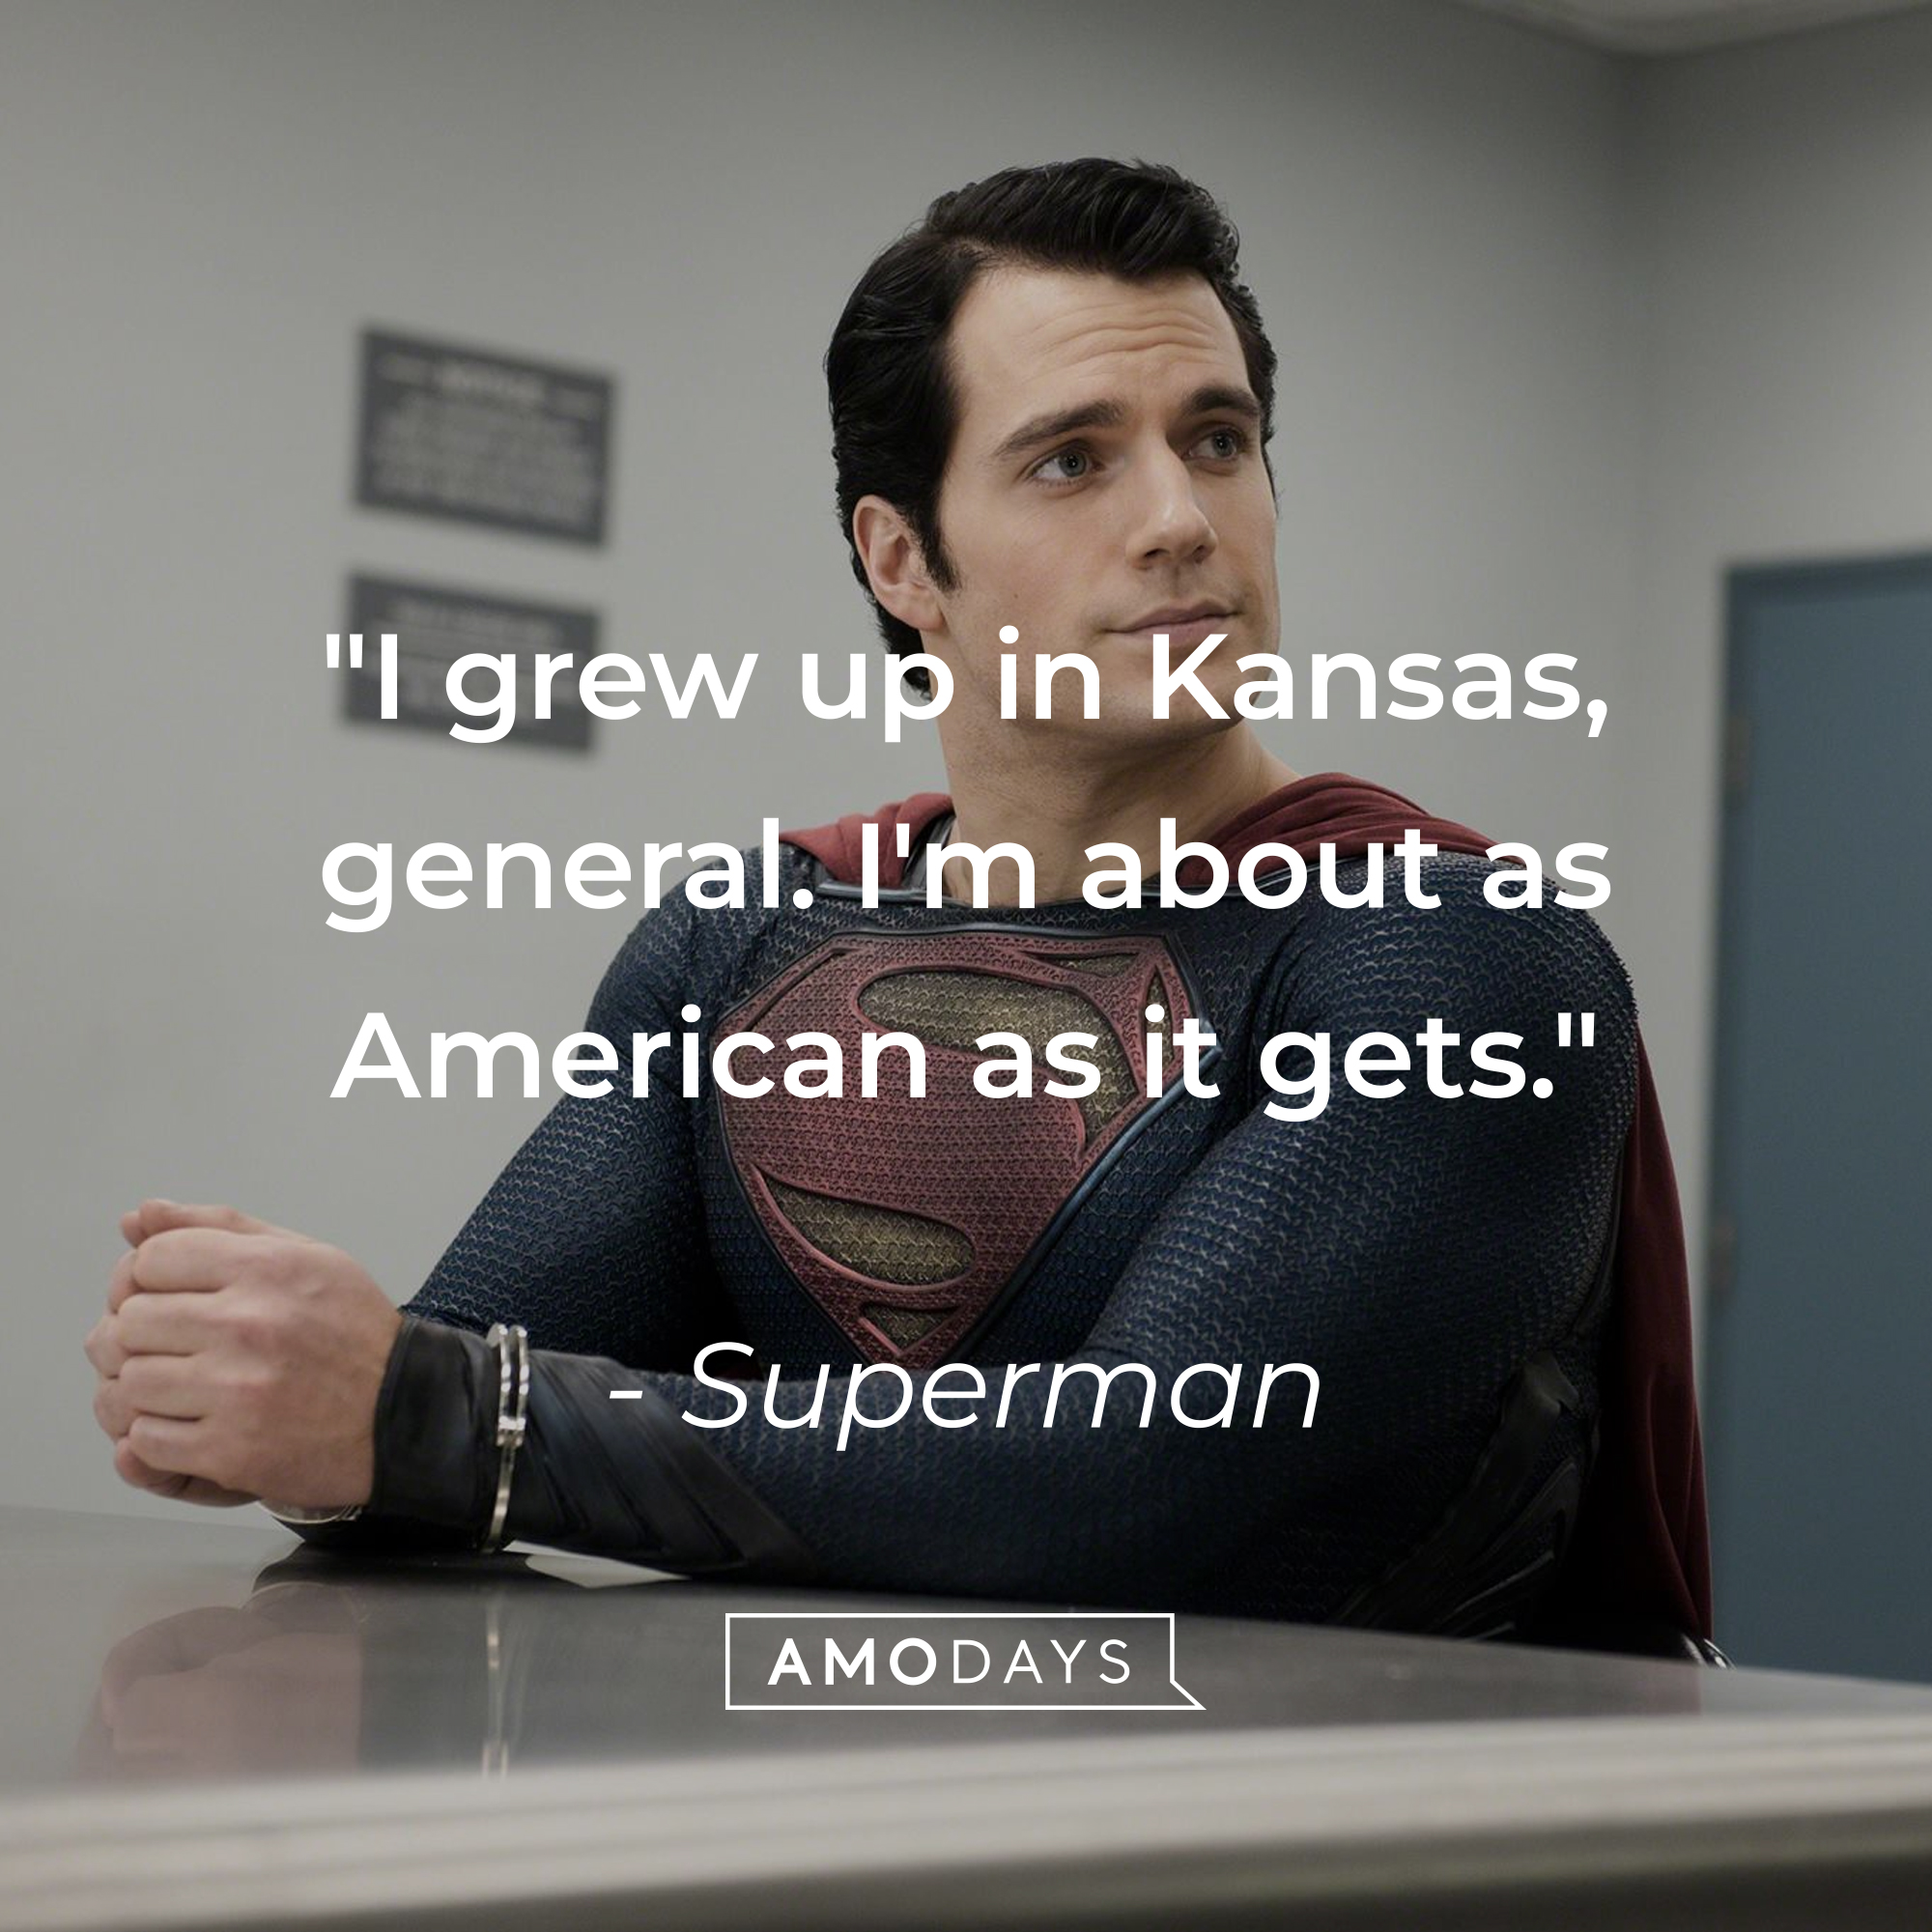 Superman’s quote: "I grew up in Kansas, general. I'm about as American as it gets." | Source: Facebook/manofsteel